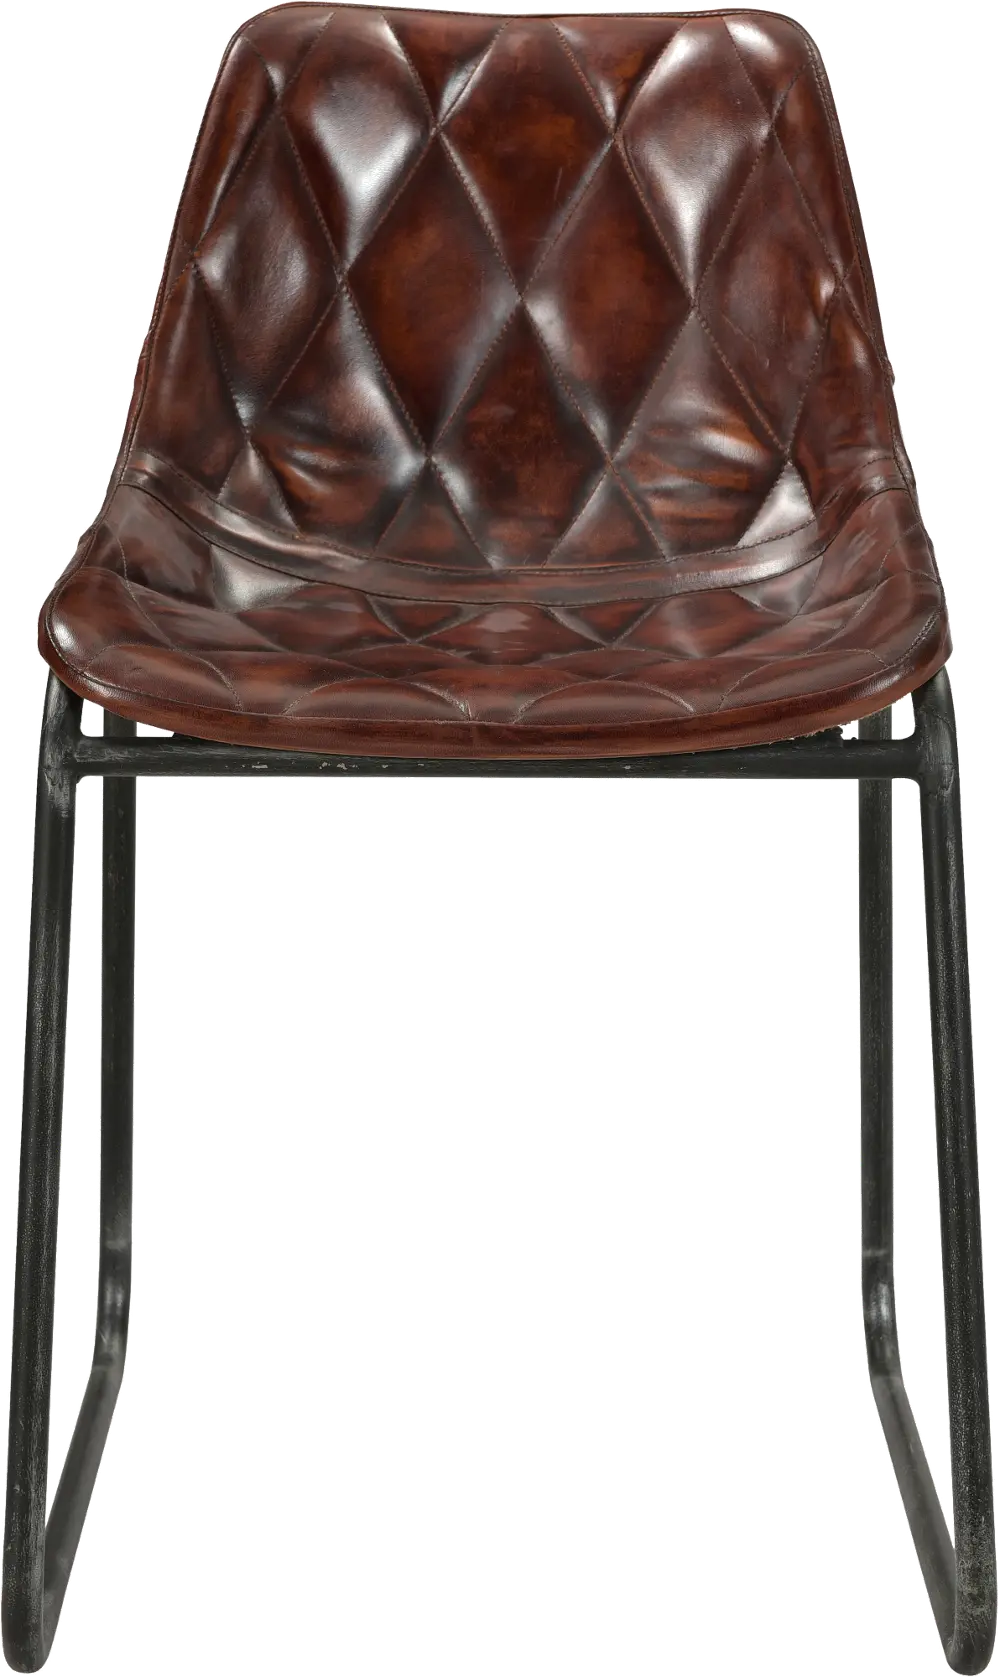 44603 Contemporary Brown Leather Dining Room Chair - Bradley-1